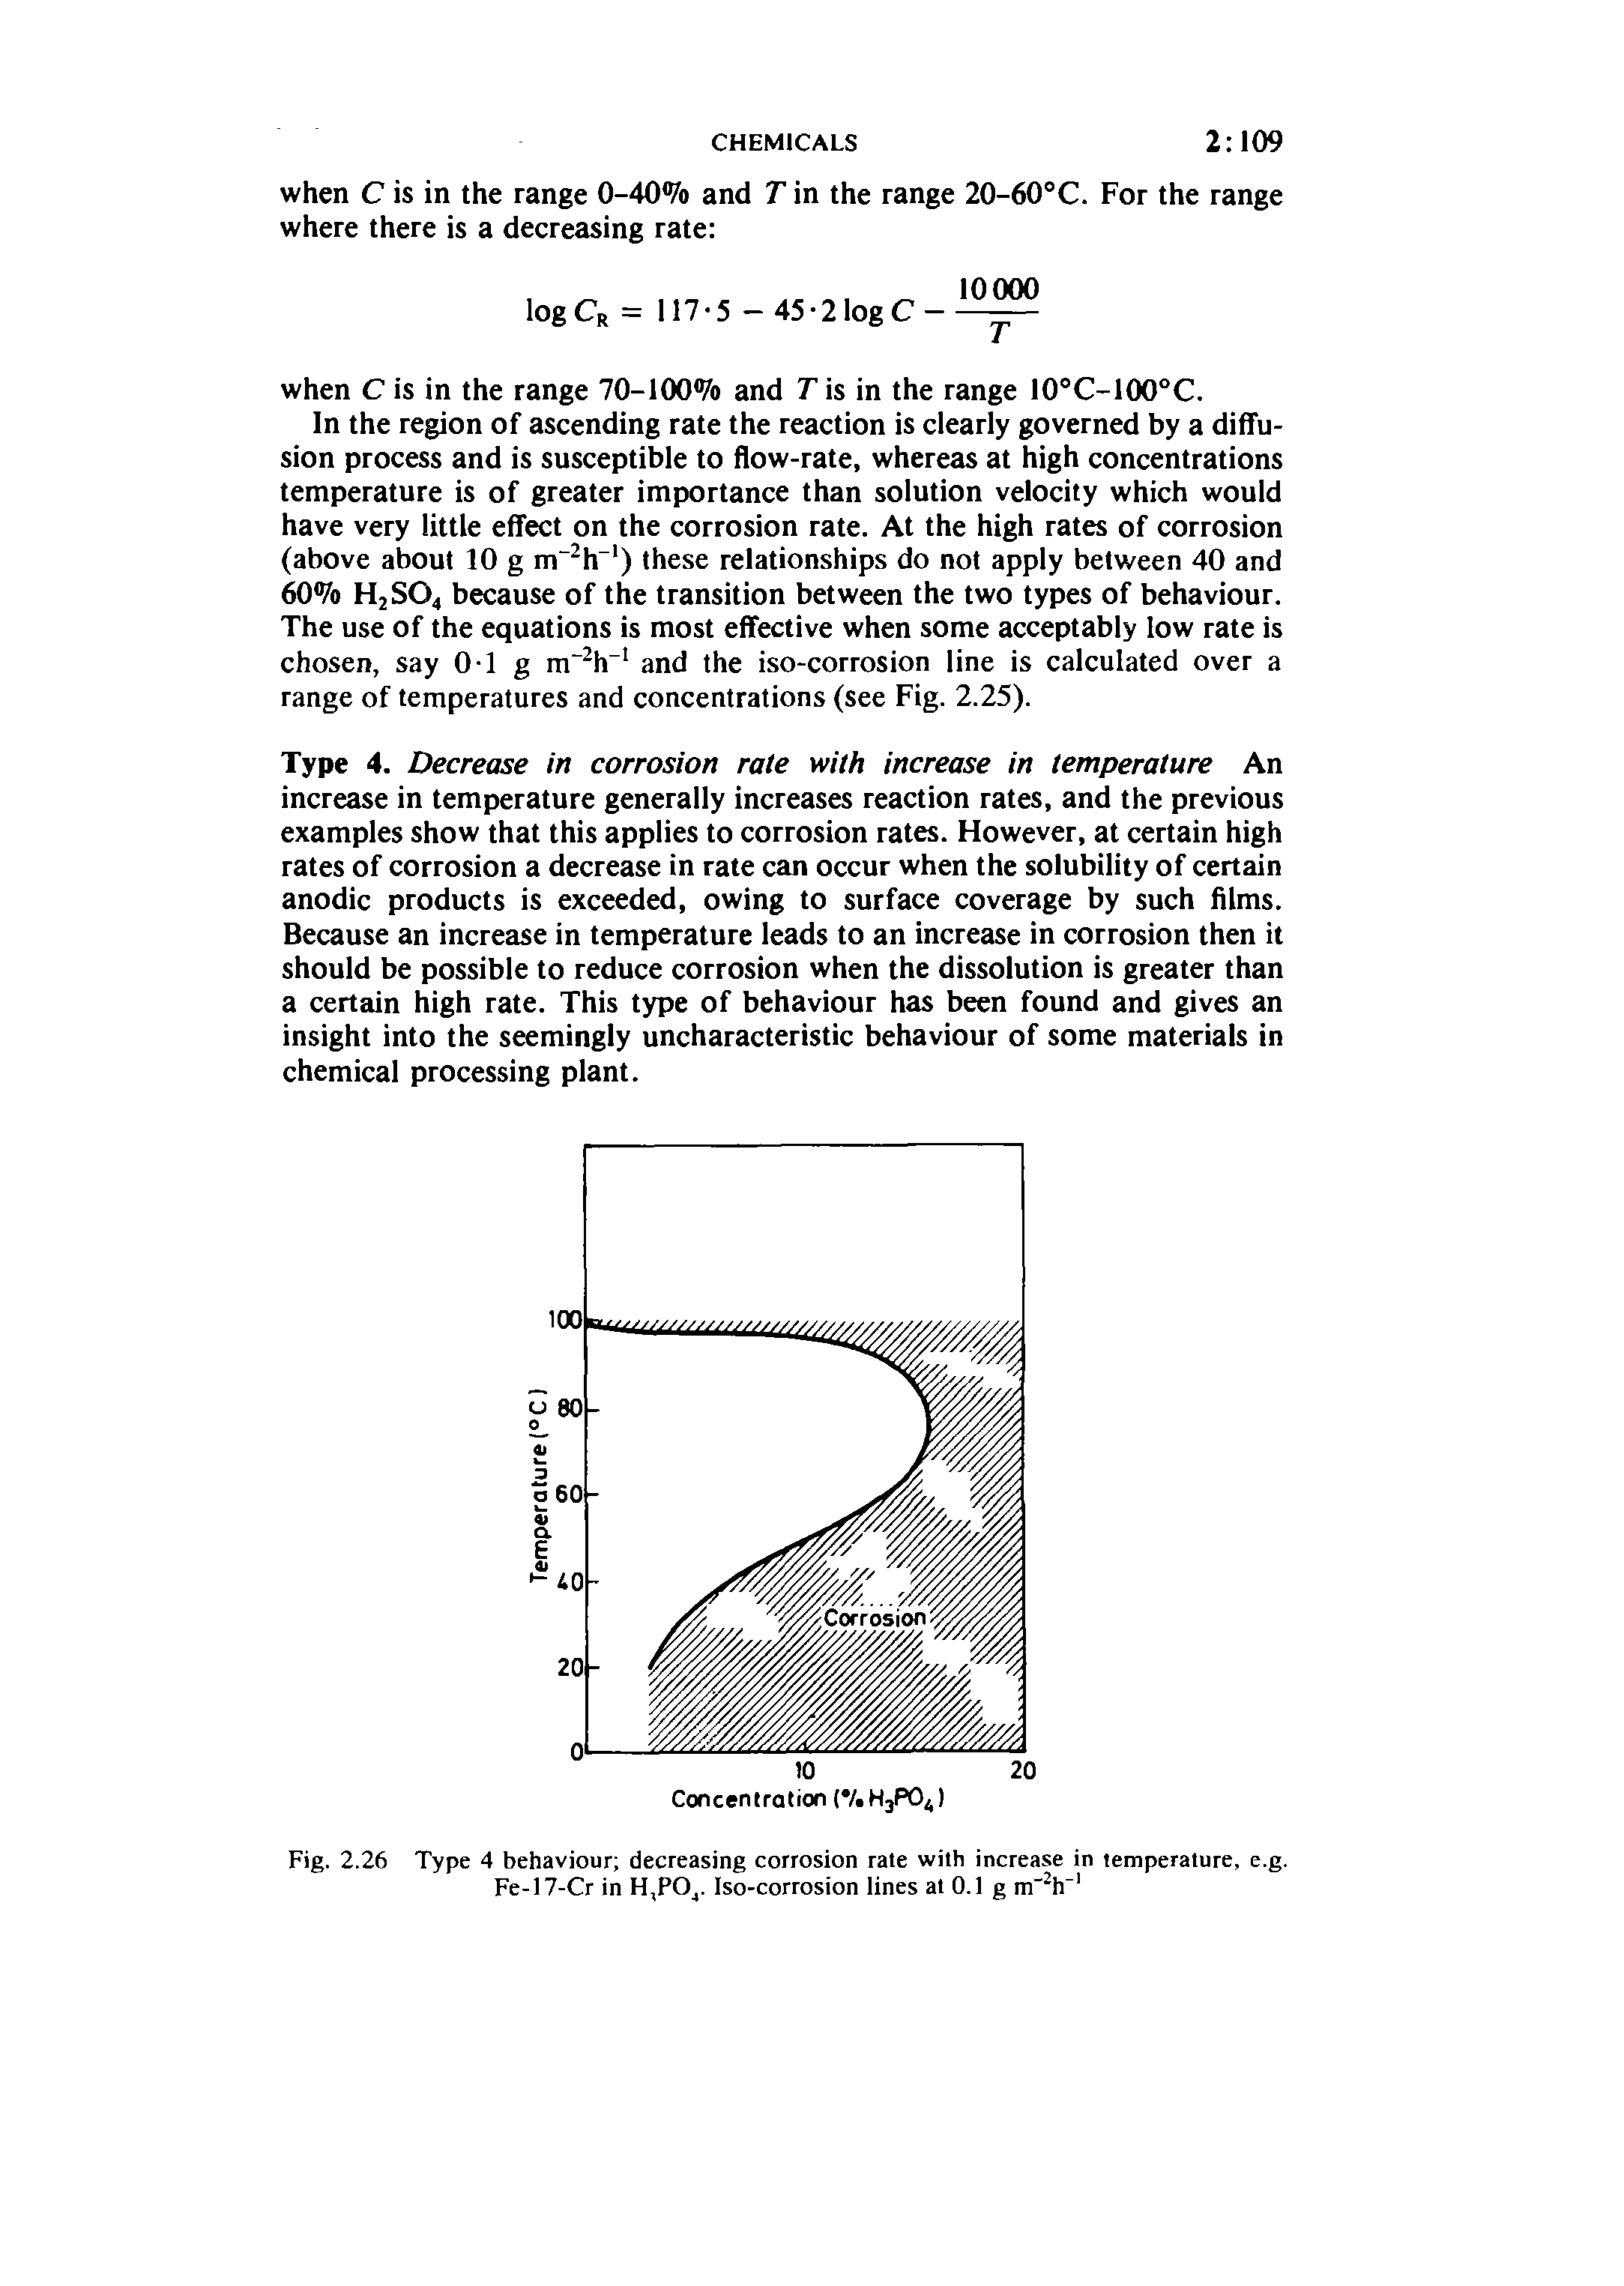 Fig. 2.26 Type 4 behaviour decreasing corrosion rate with increase in temperature, e.g. Fe-17-Cr in H,POj. Iso-corrosion lines at 0.1 g m" h ...